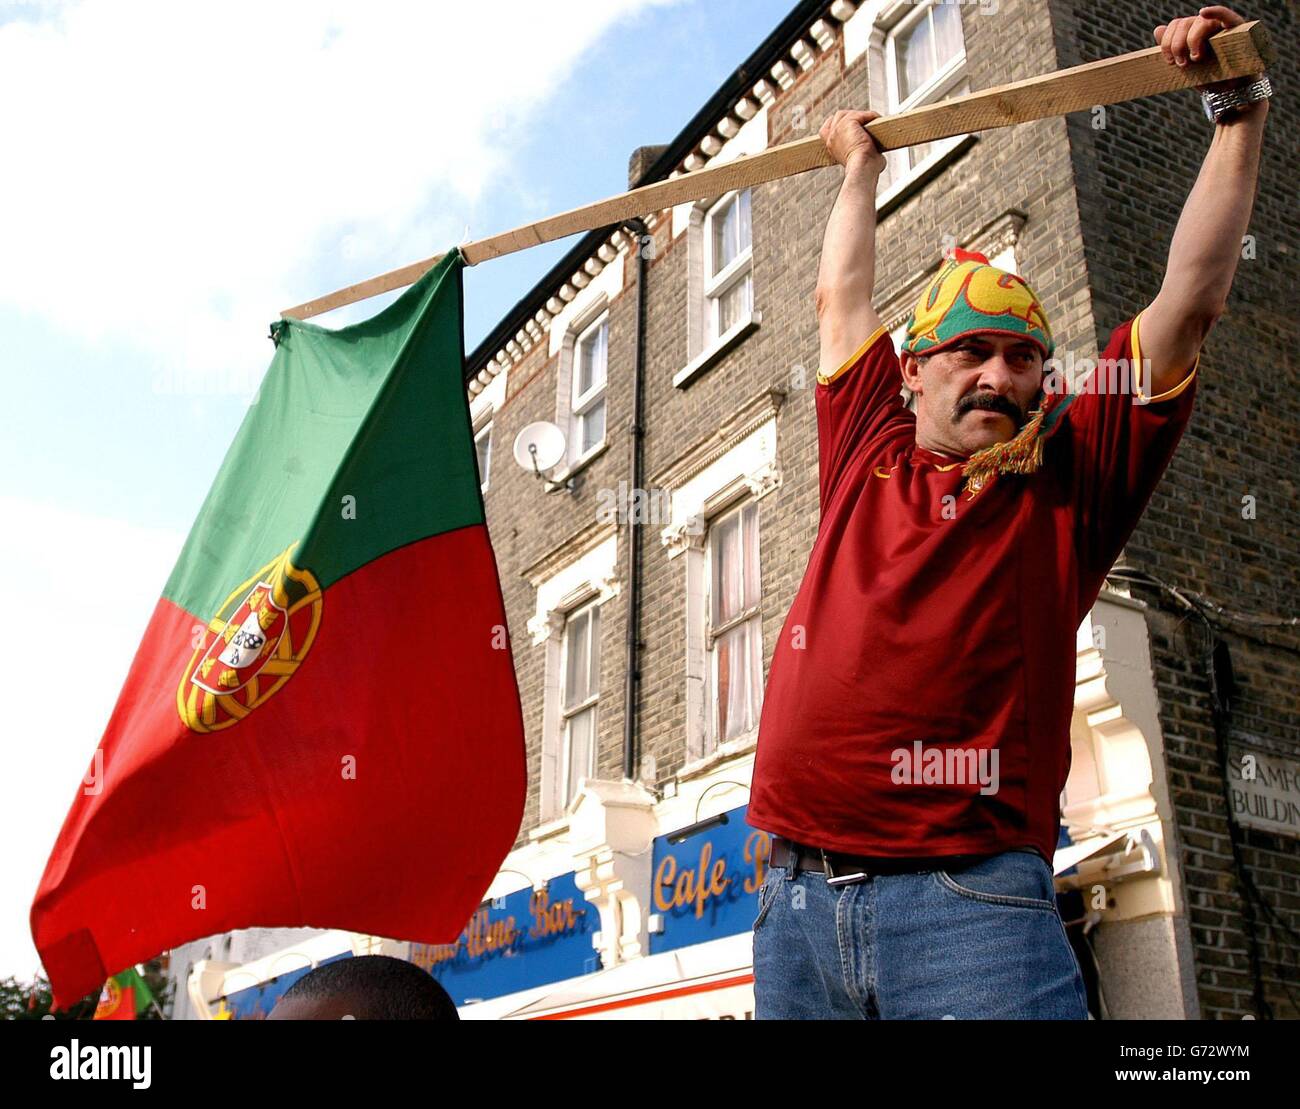 Portugese fans gather in London's South Lambeth Road to support their national team in the Euro 2004 finals tonight against Greece in Lisbon.. Stock Photo